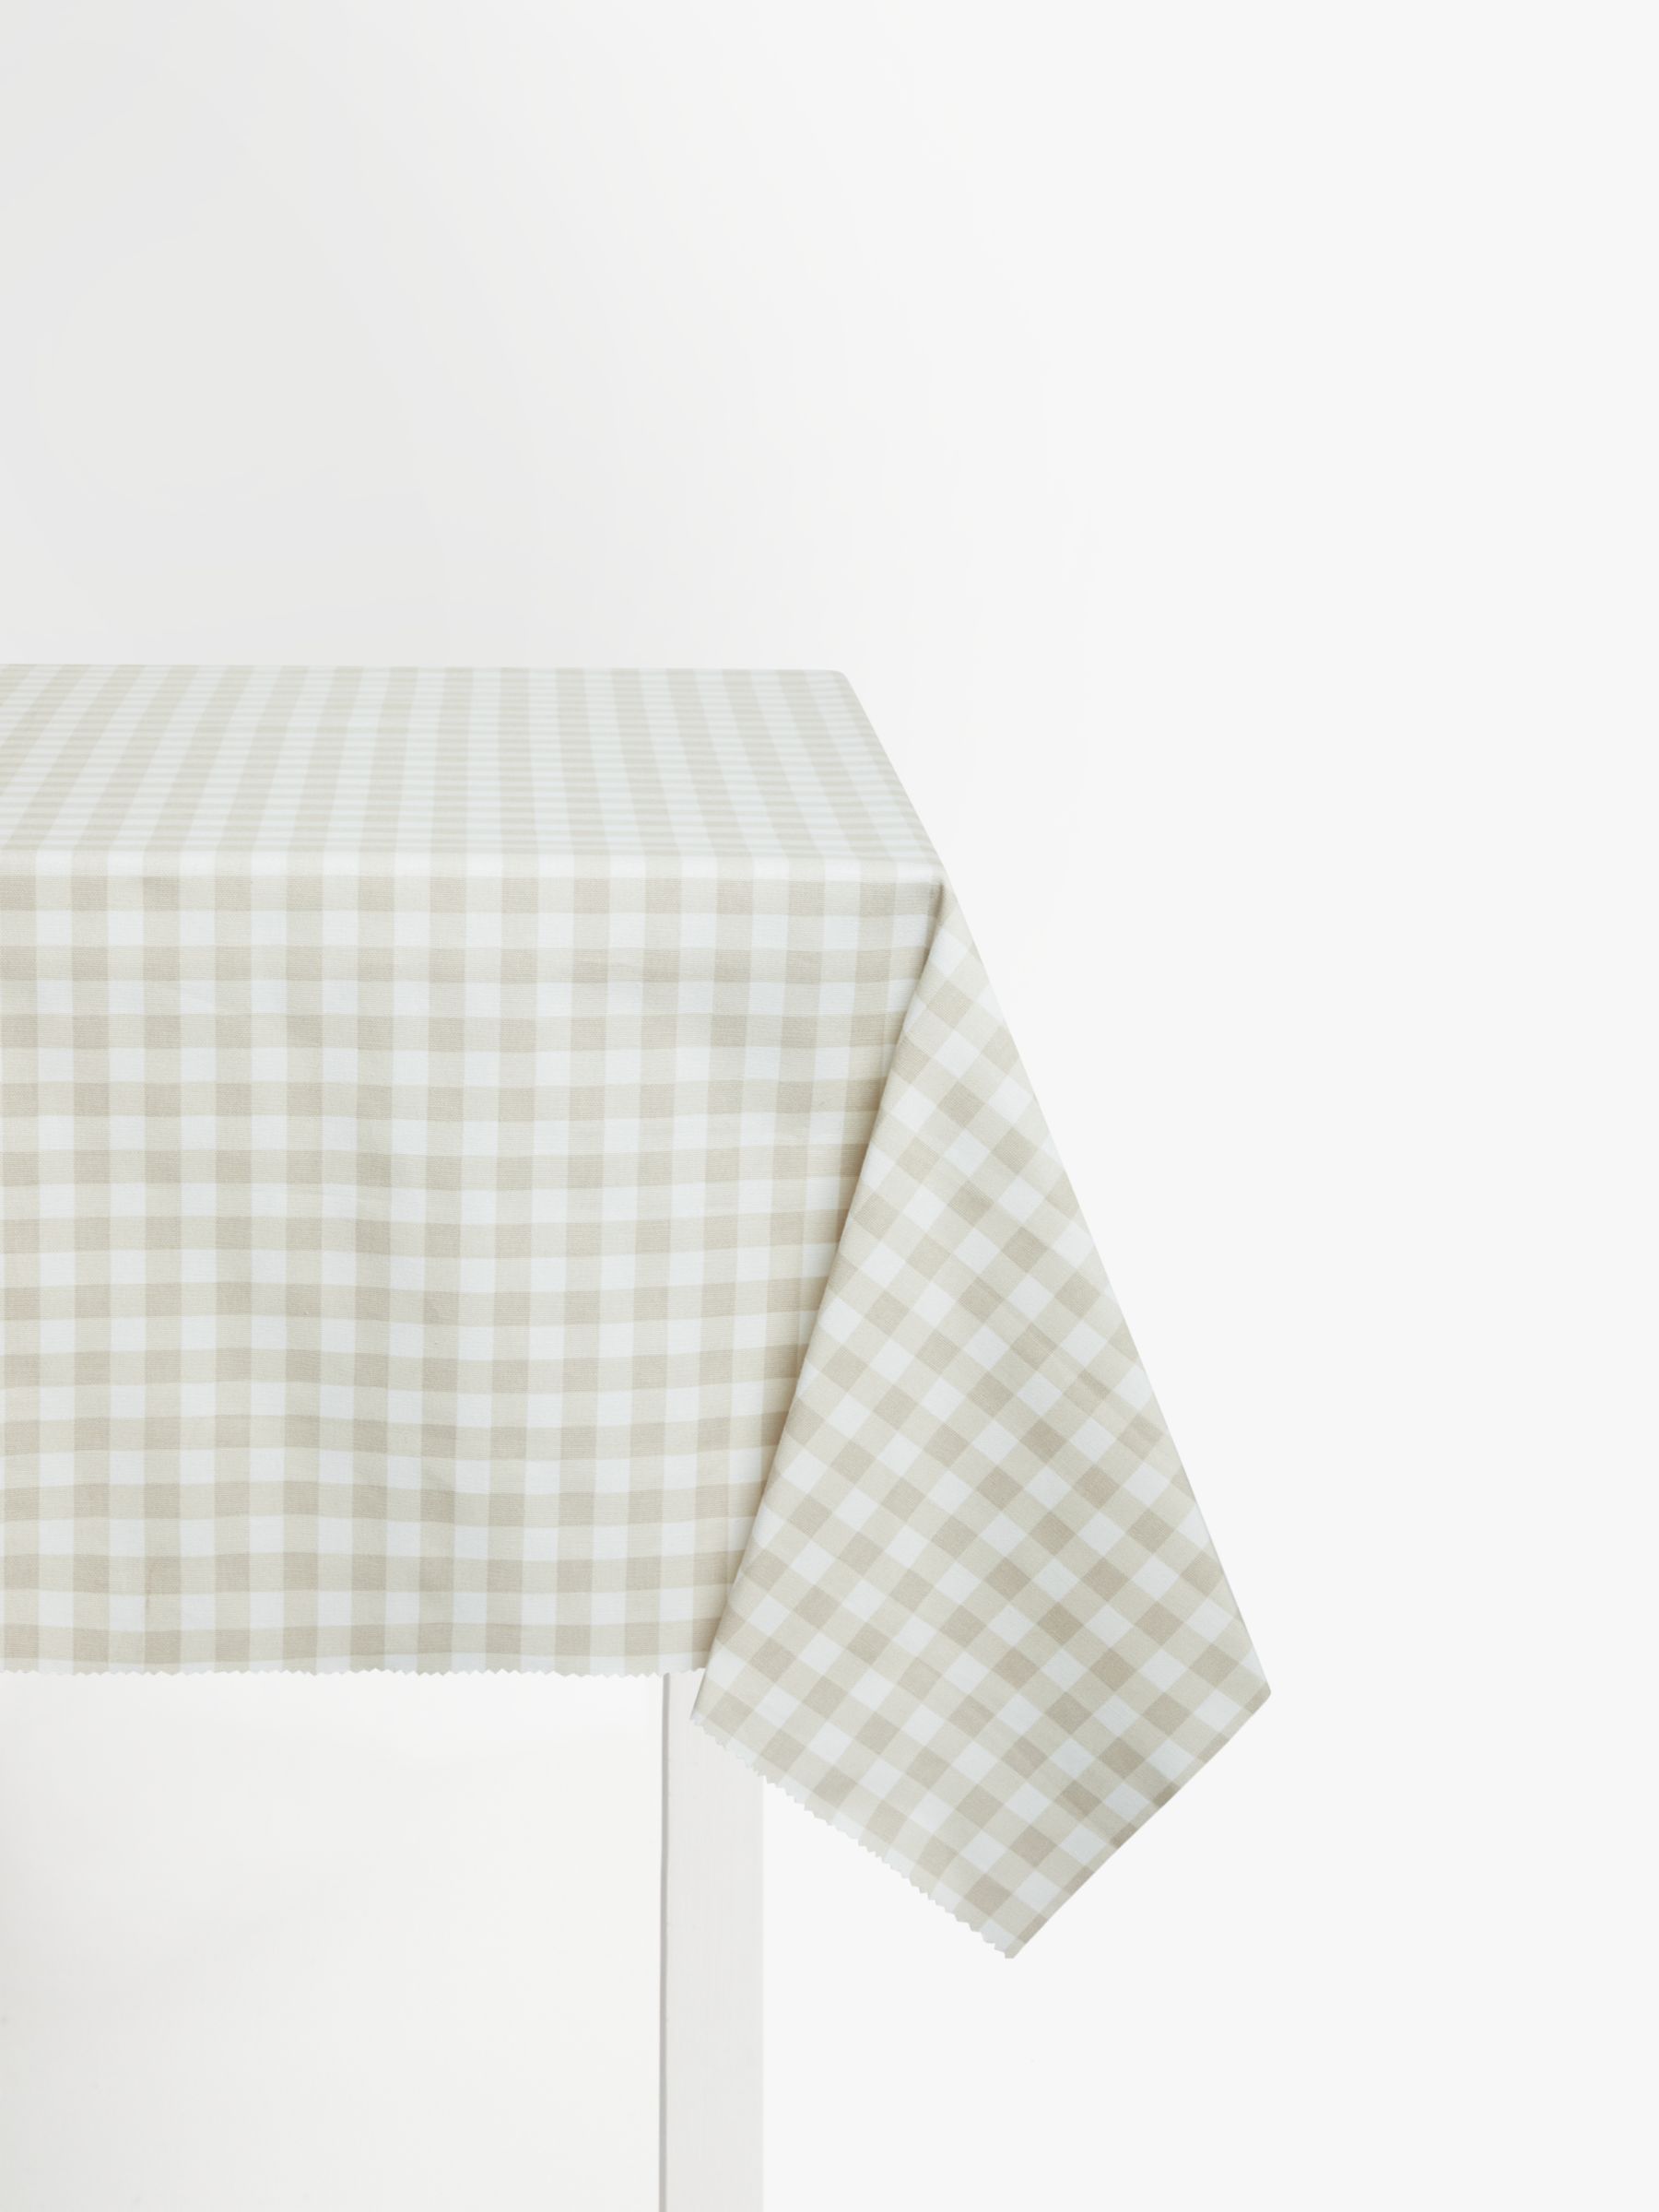 John Lewis ANYDAY Gingham PVC Tablecloth Fabric, Greige